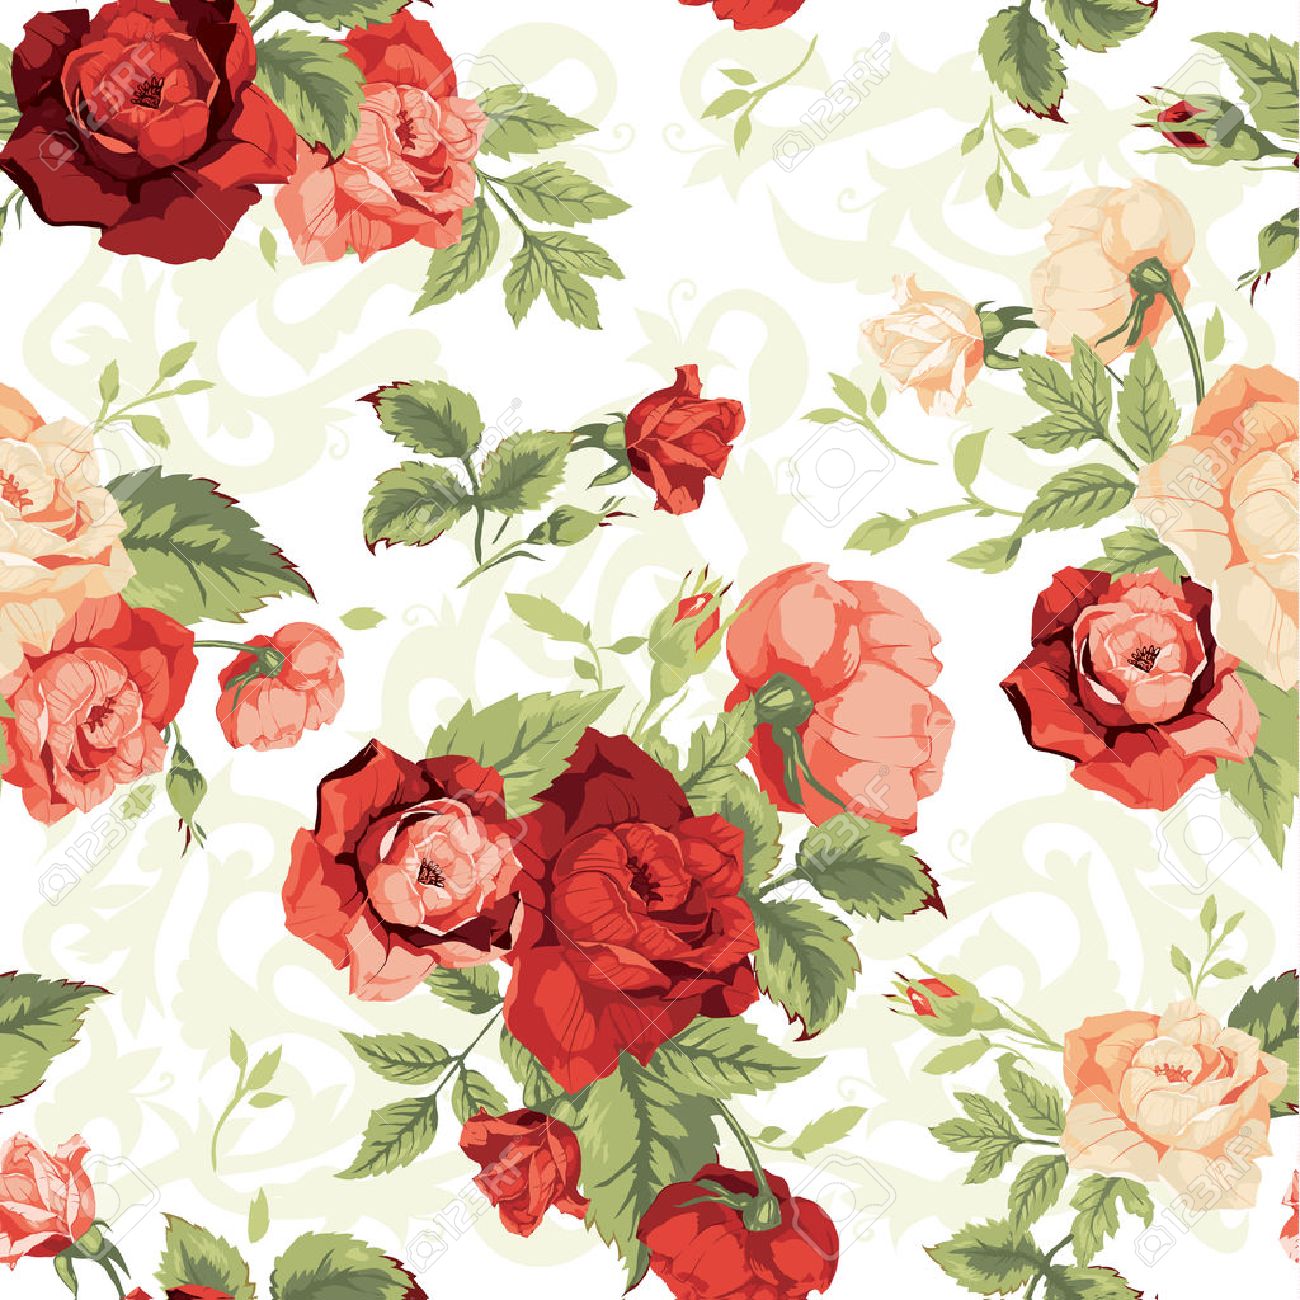 Seamless Floral Pattern With Of Red And Orange Roses On White